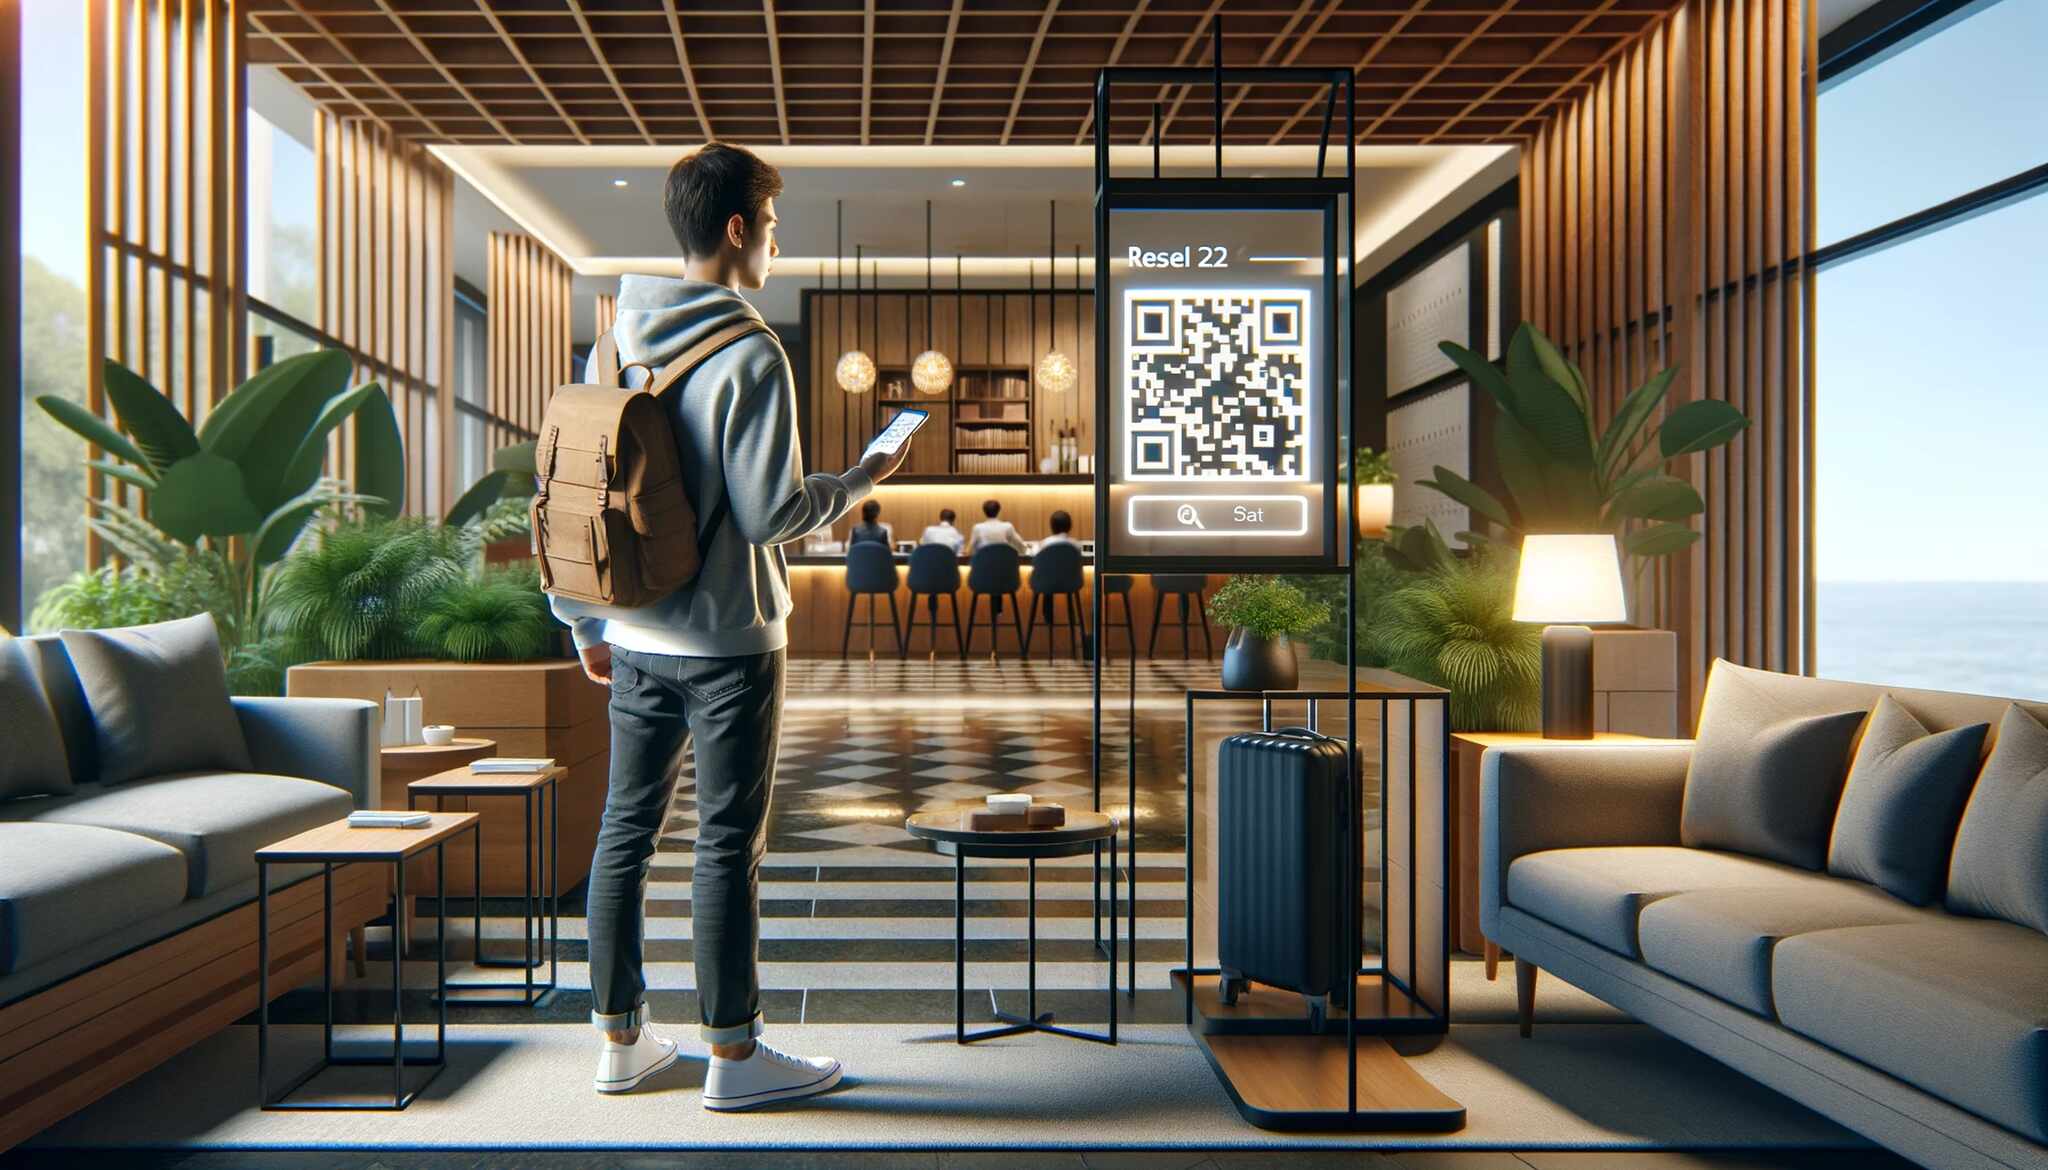 a traveler standing in a hotel lobby, looking at a digital screen displaying a QR code